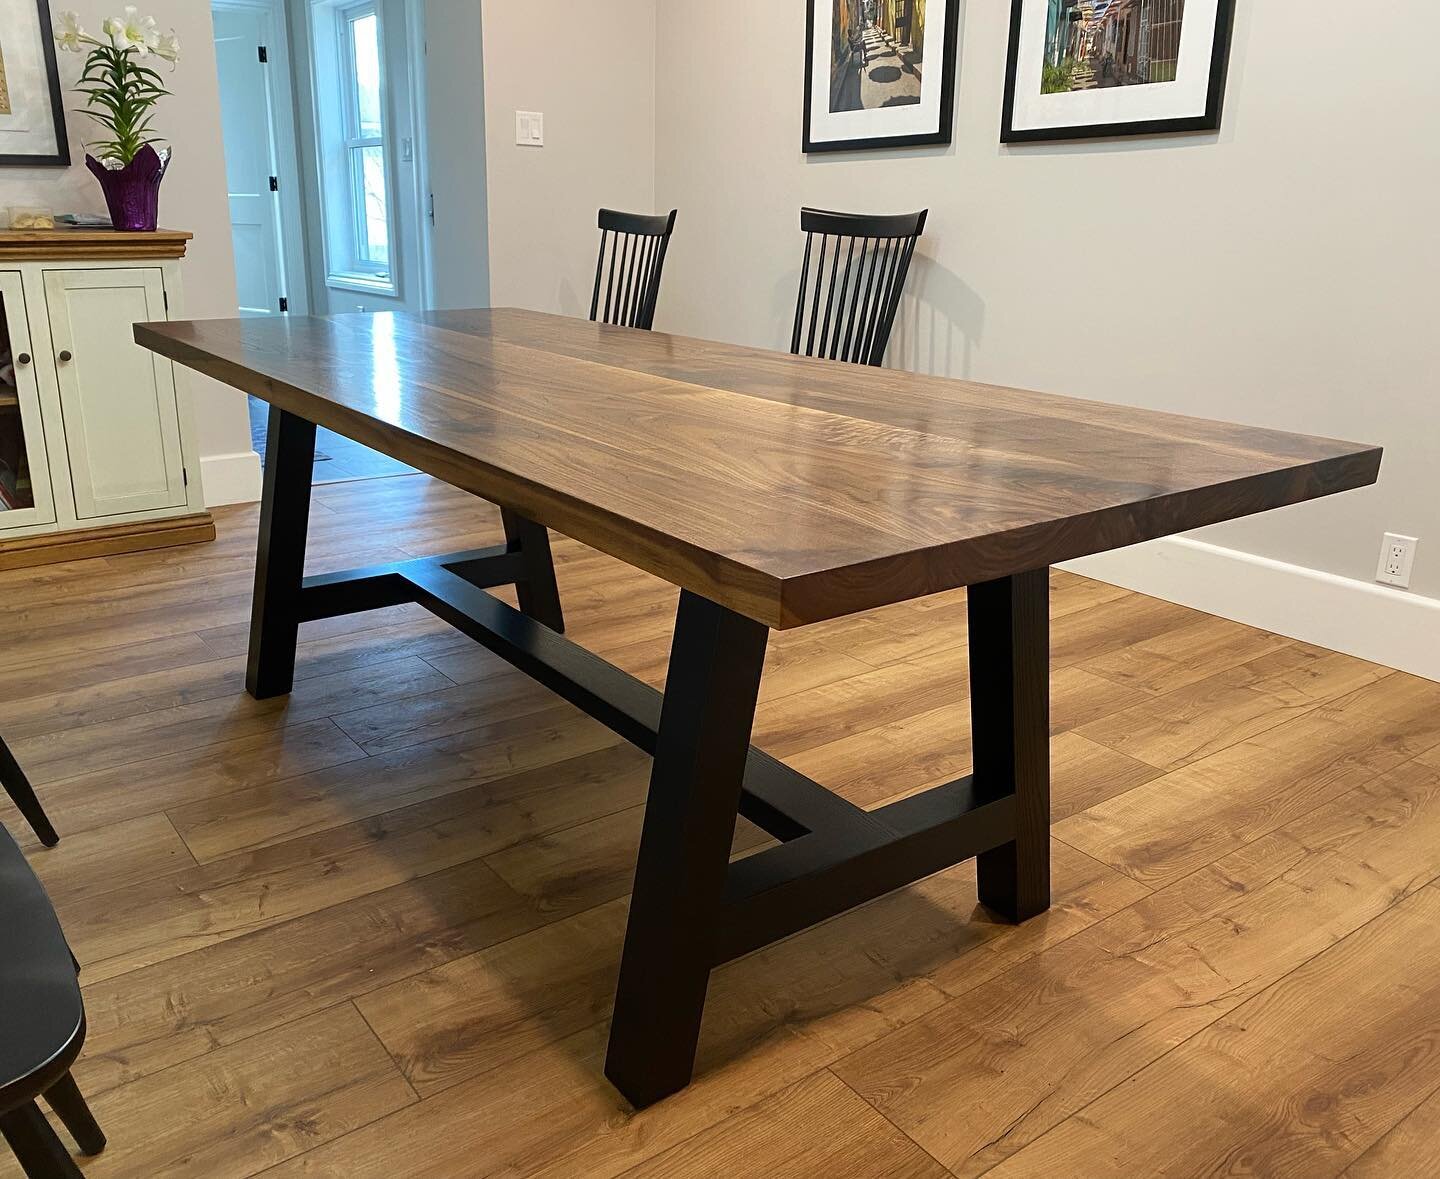 Walnut dining table w blackened ash base. Love the chairs with this one!
.
#diningtable #walnut #customdiningtable #diningroom #bespoketable #woodwork #guelph